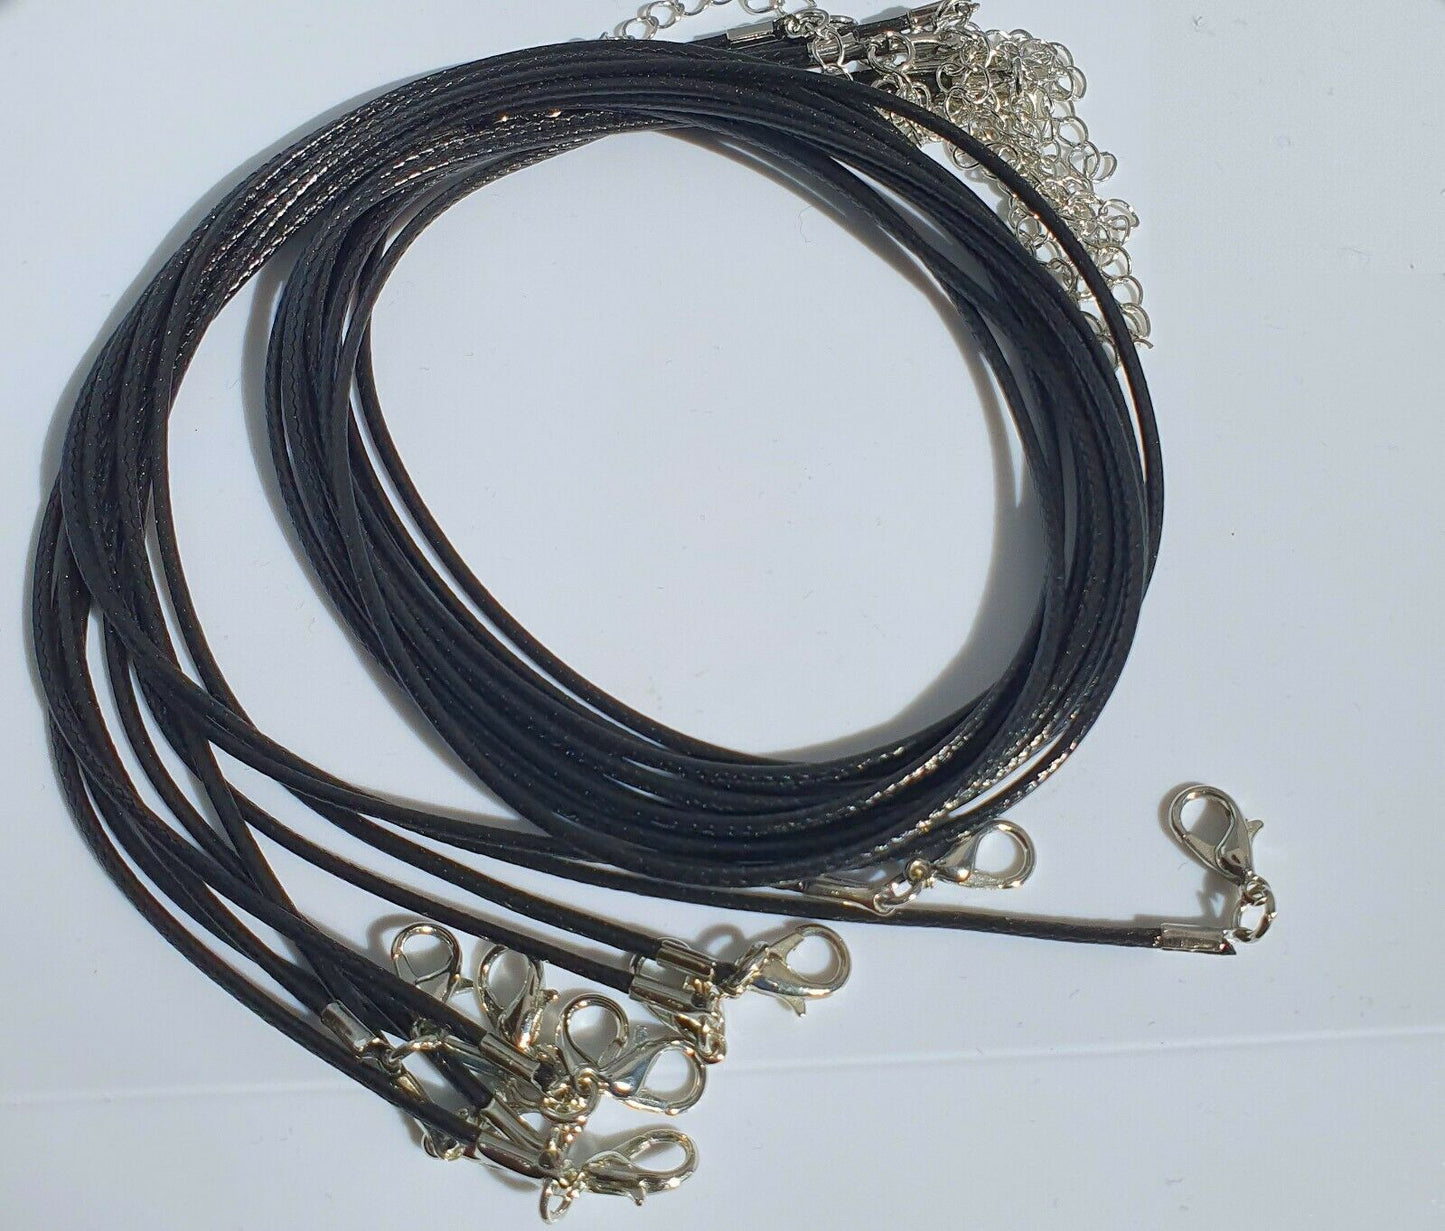 63cm(25") Long Black Faux Leather Cord with Clasp Necklace String for Pendants